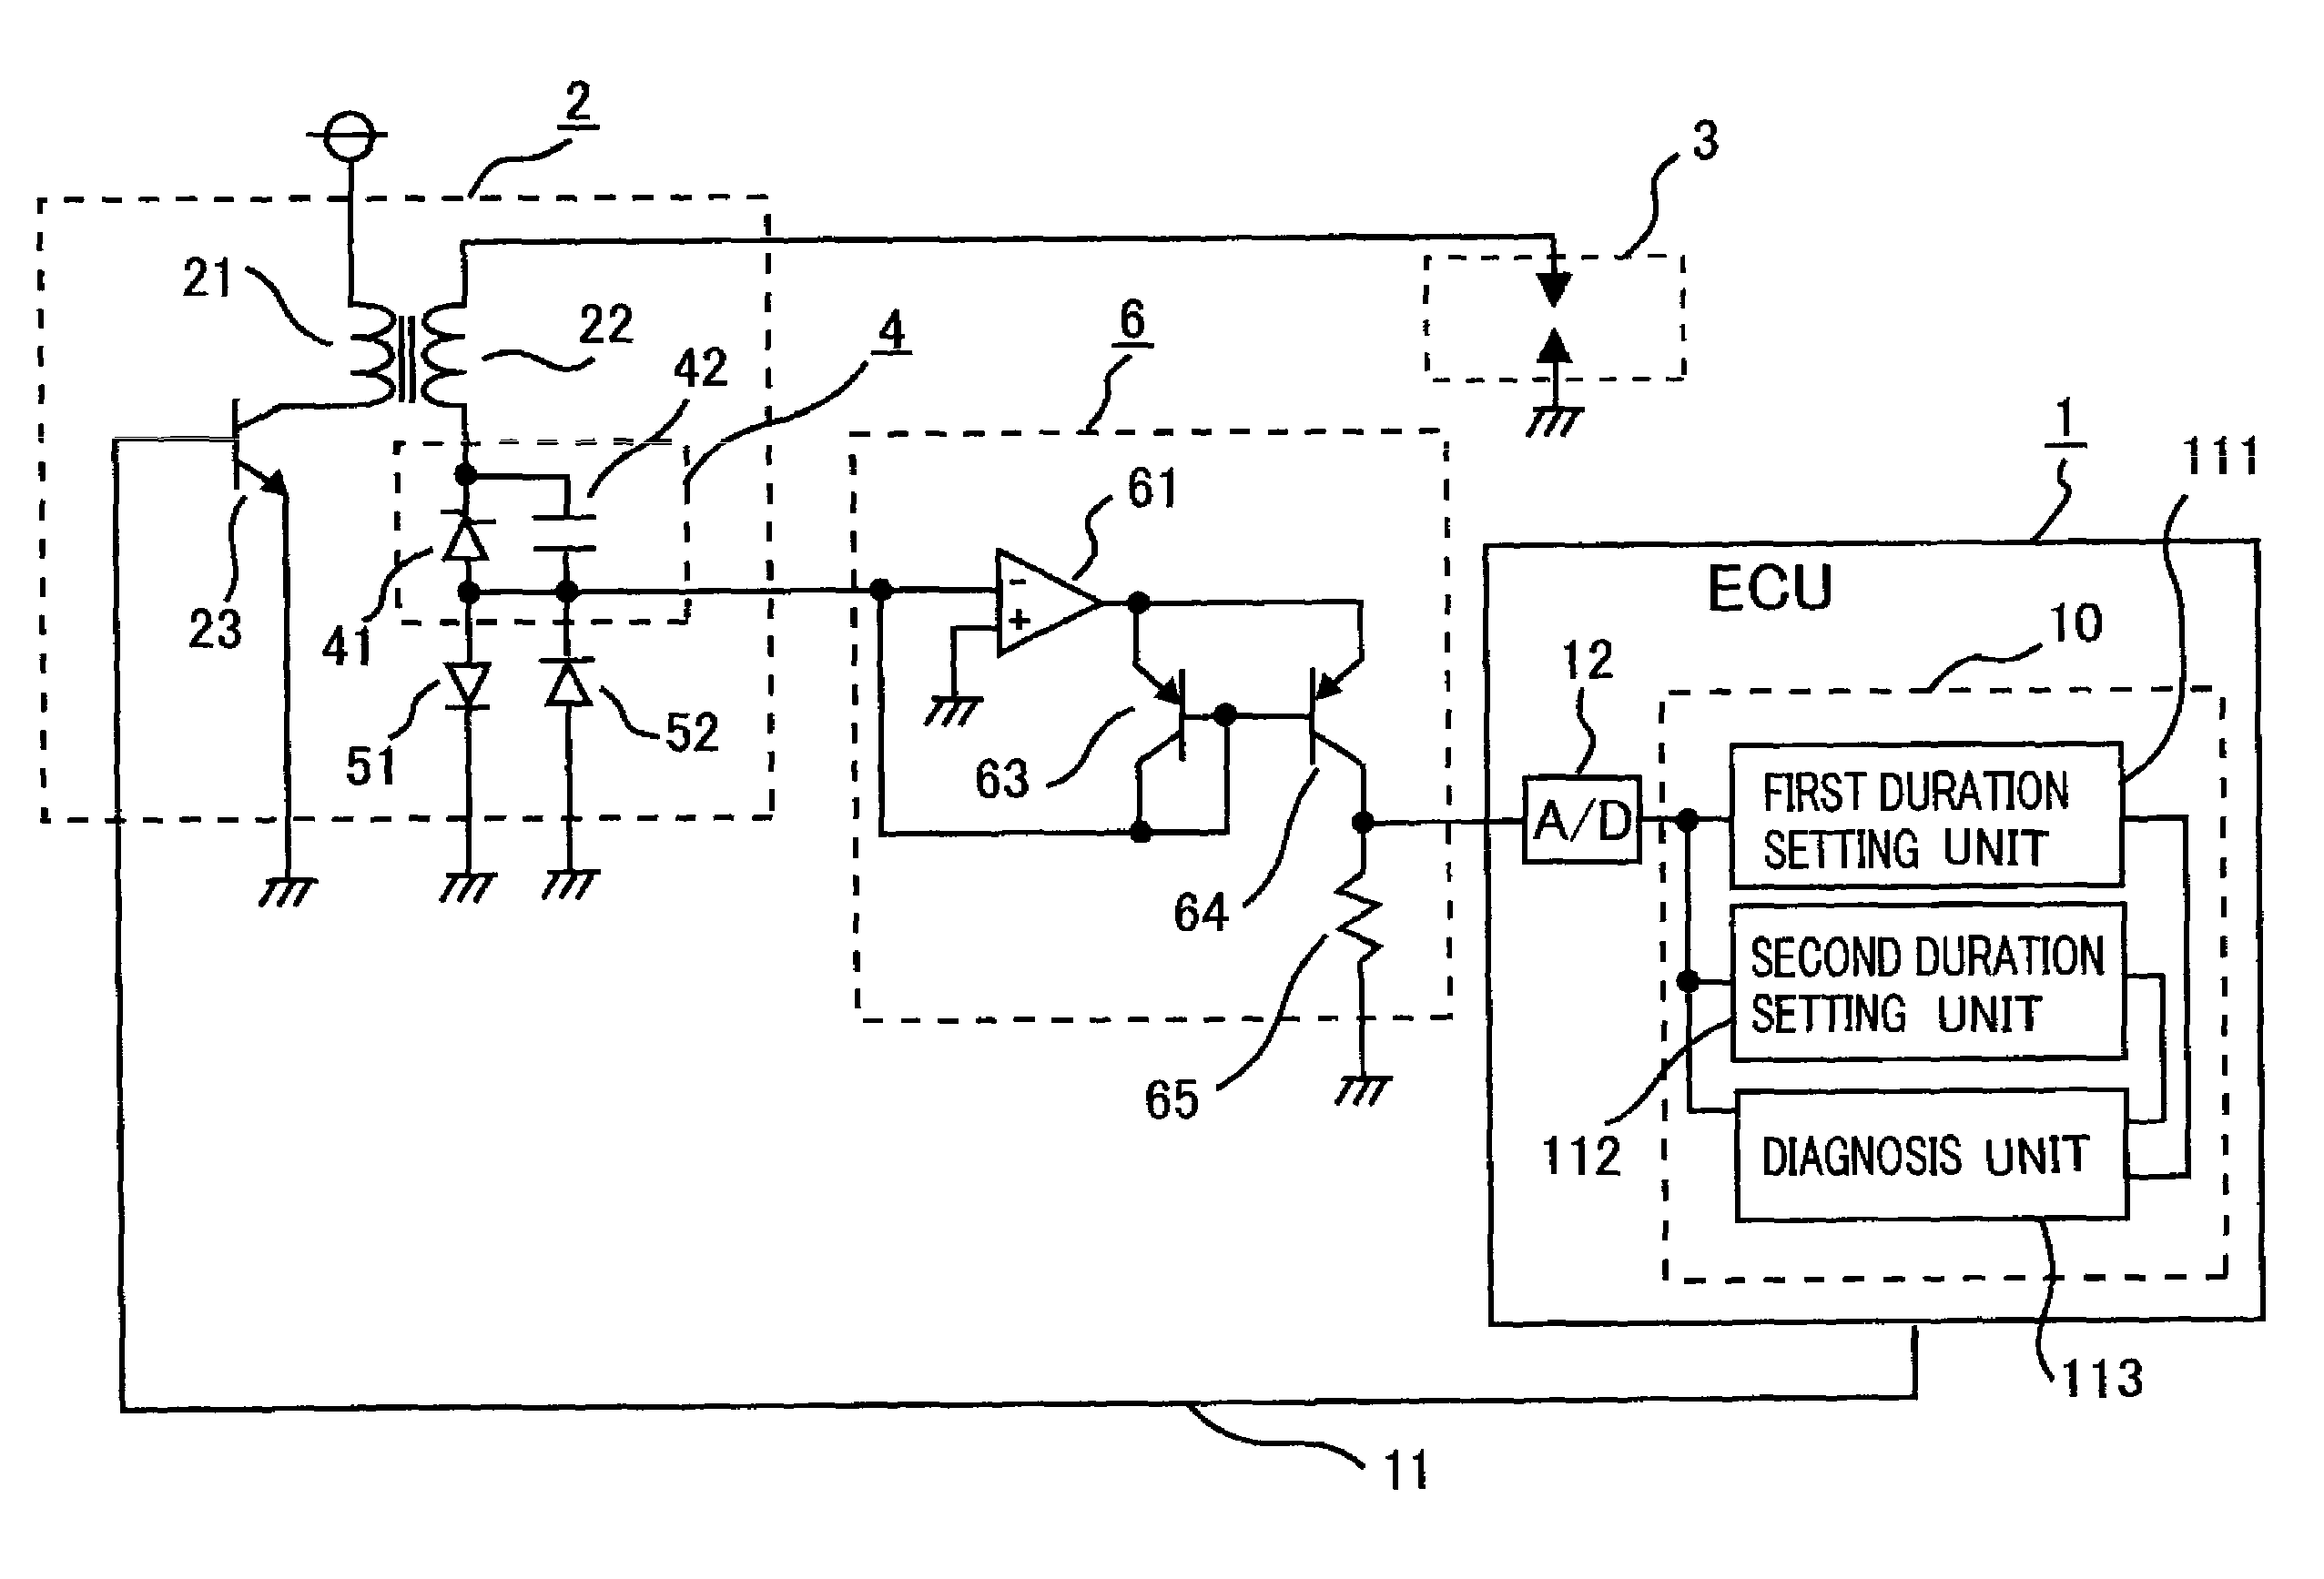 Internal-combustion-engine ignition diagnosis apparatus and internal-combustion-engine control apparatus